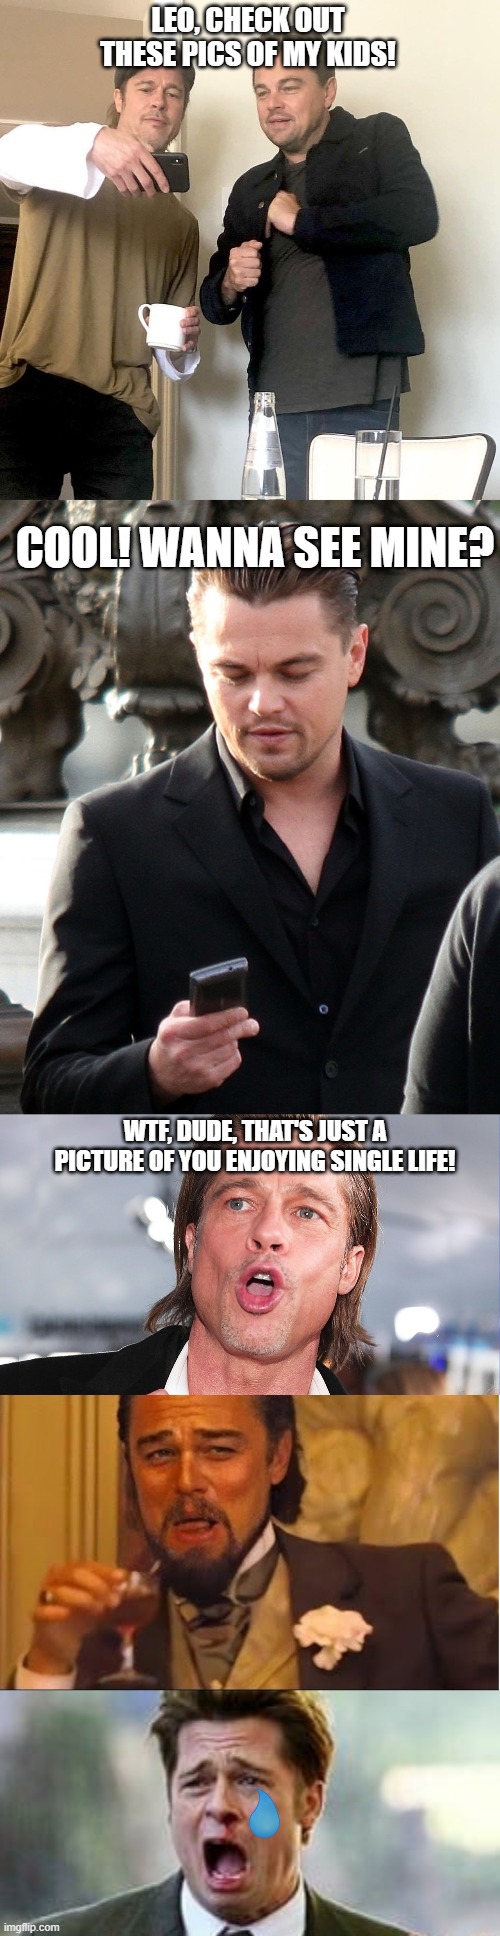 Brad Pitt and Leonardo DiCaprio | LEO, CHECK OUT THESE PICS OF MY KIDS! COOL! WANNA SEE MINE? WTF, DUDE, THAT'S JUST A PICTURE OF YOU ENJOYING SINGLE LIFE! | image tagged in brad pitt,leonardo dicaprio | made w/ Imgflip meme maker